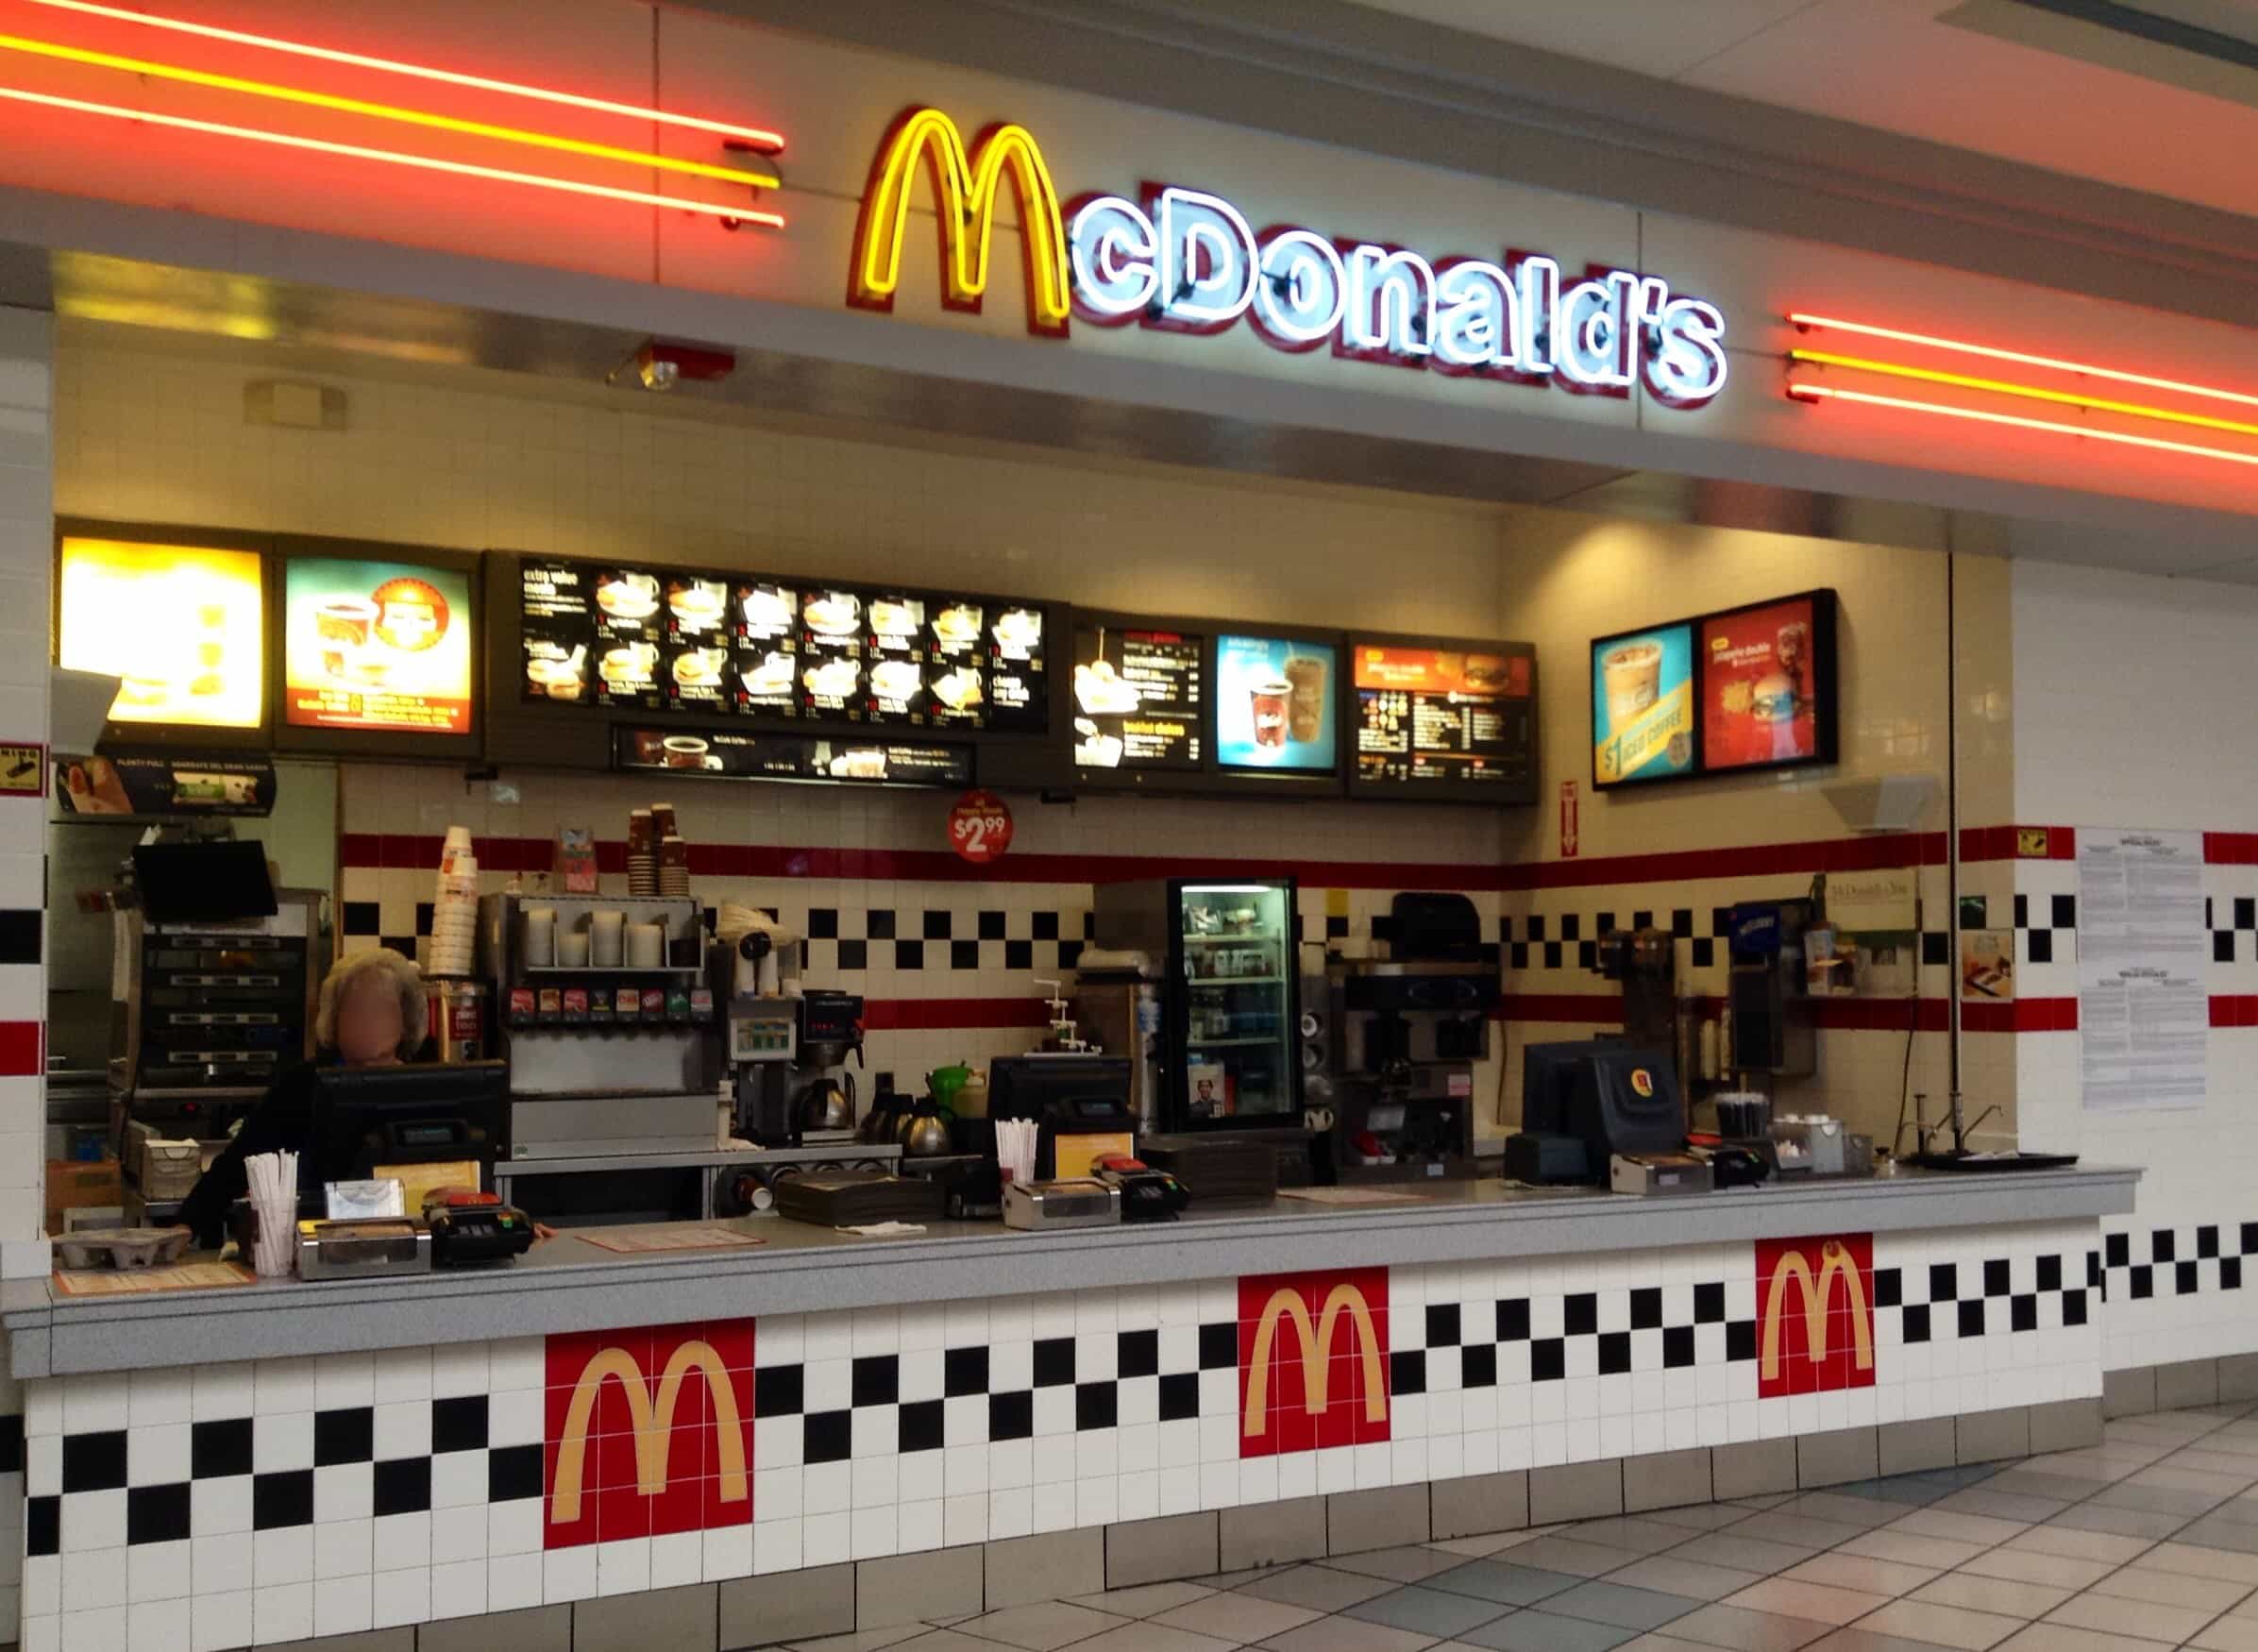 McDonald's is getting an upgrade.